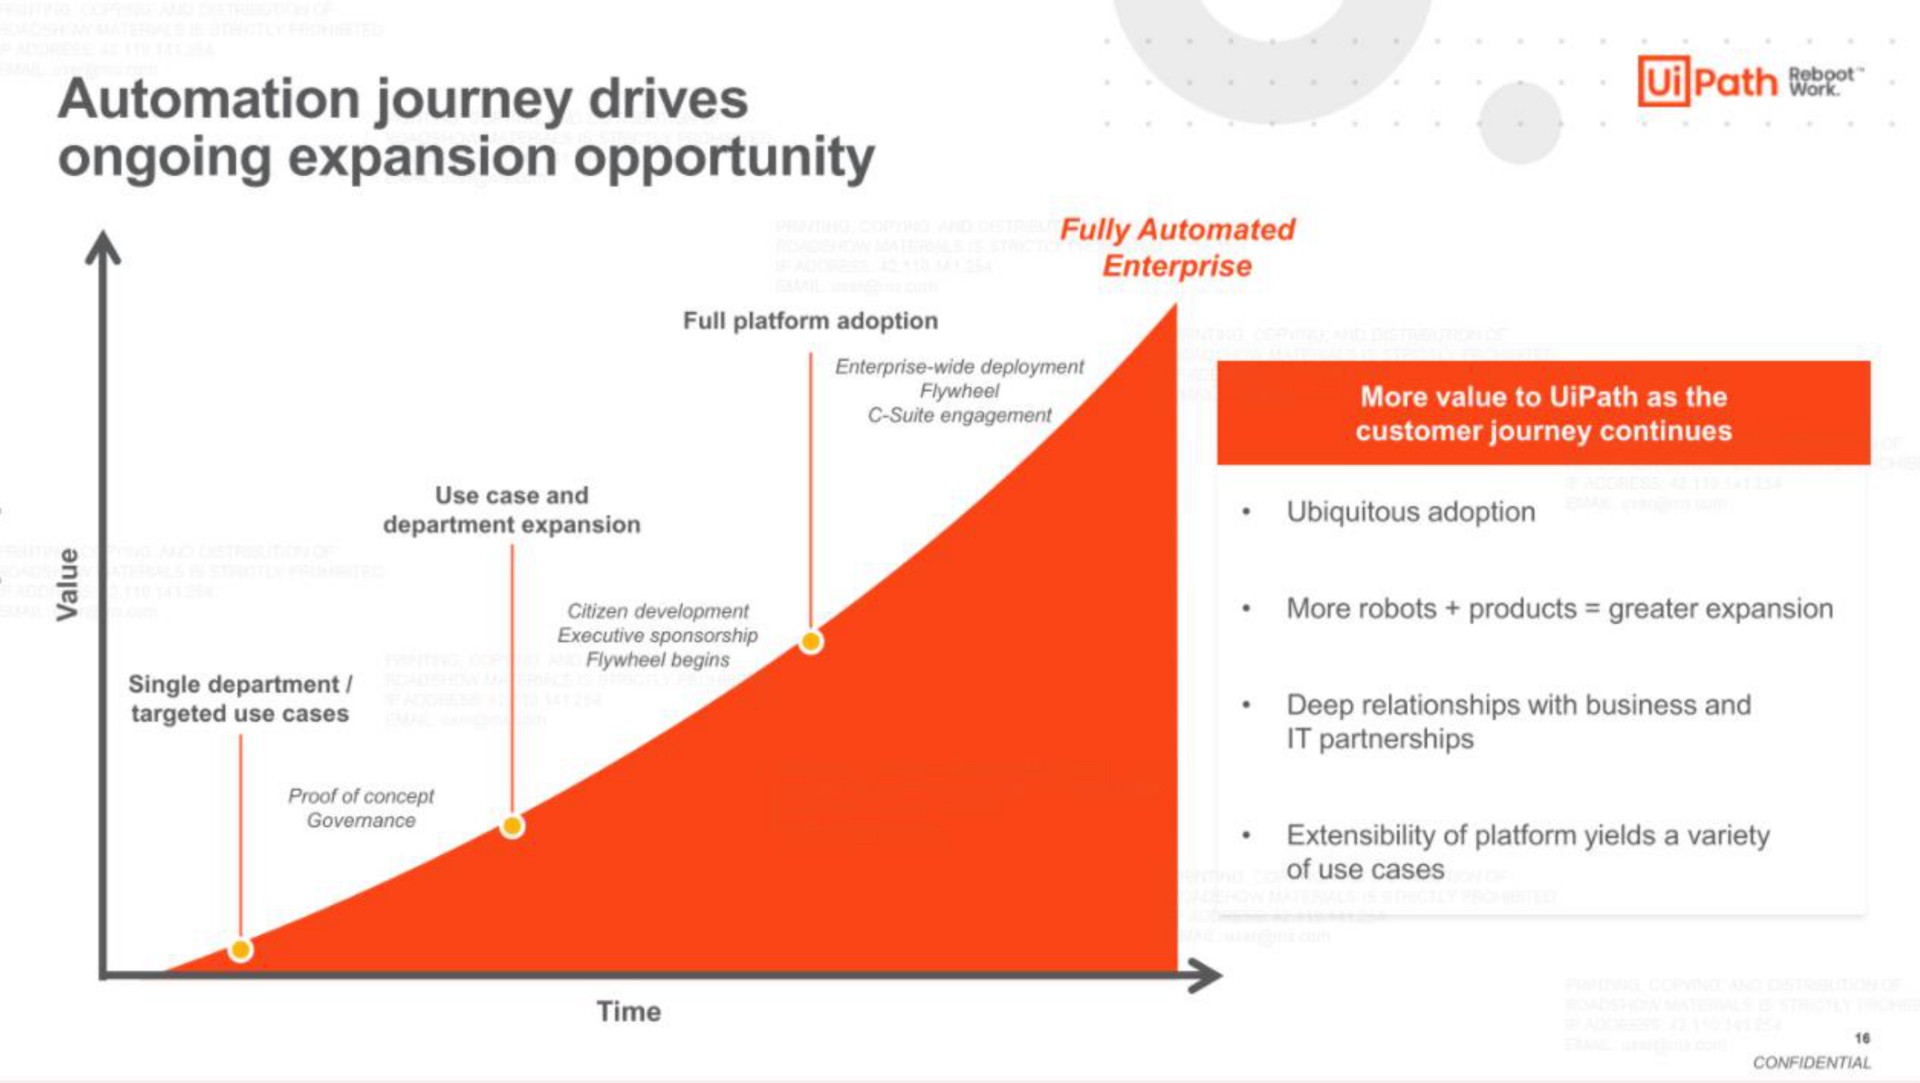 journey drives ongoing expansion opportunity path wee | UiPath